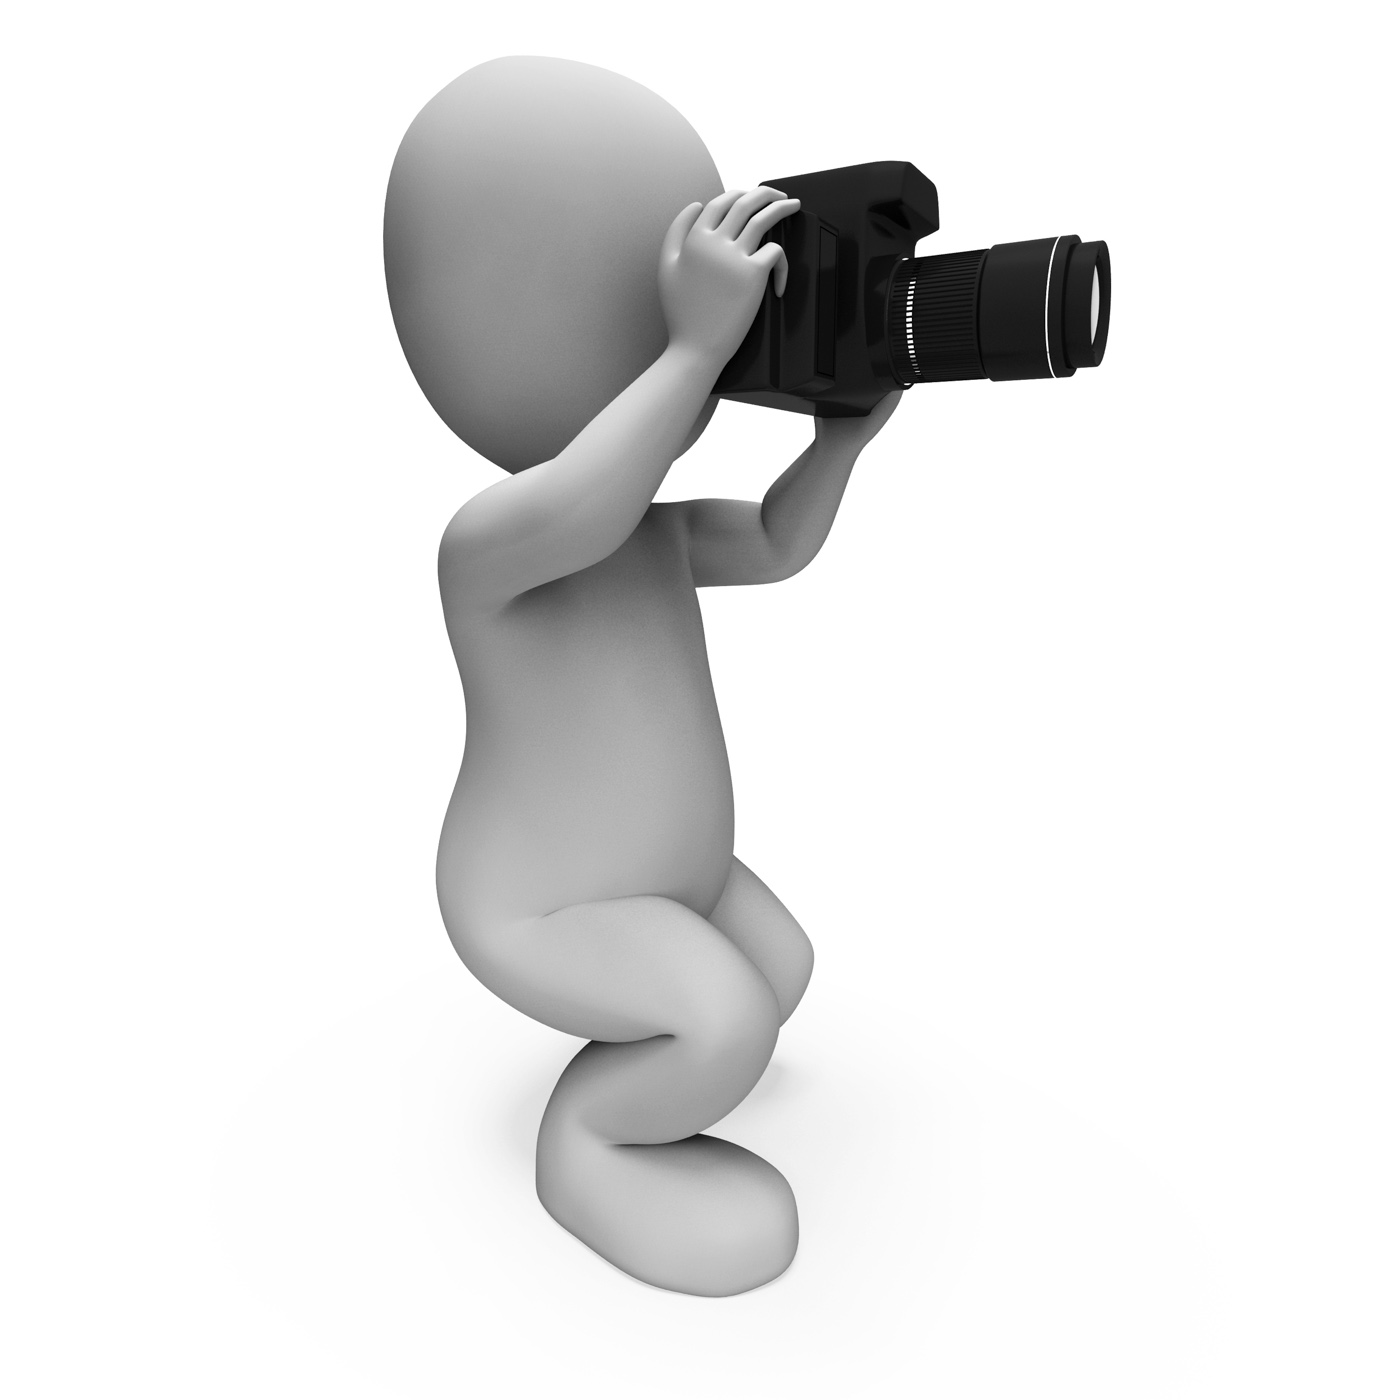 Photos Character Shows Digital Dslr And Photography, Photography, Takingaphoto, Takepicture, Takephoto, HQ Photo